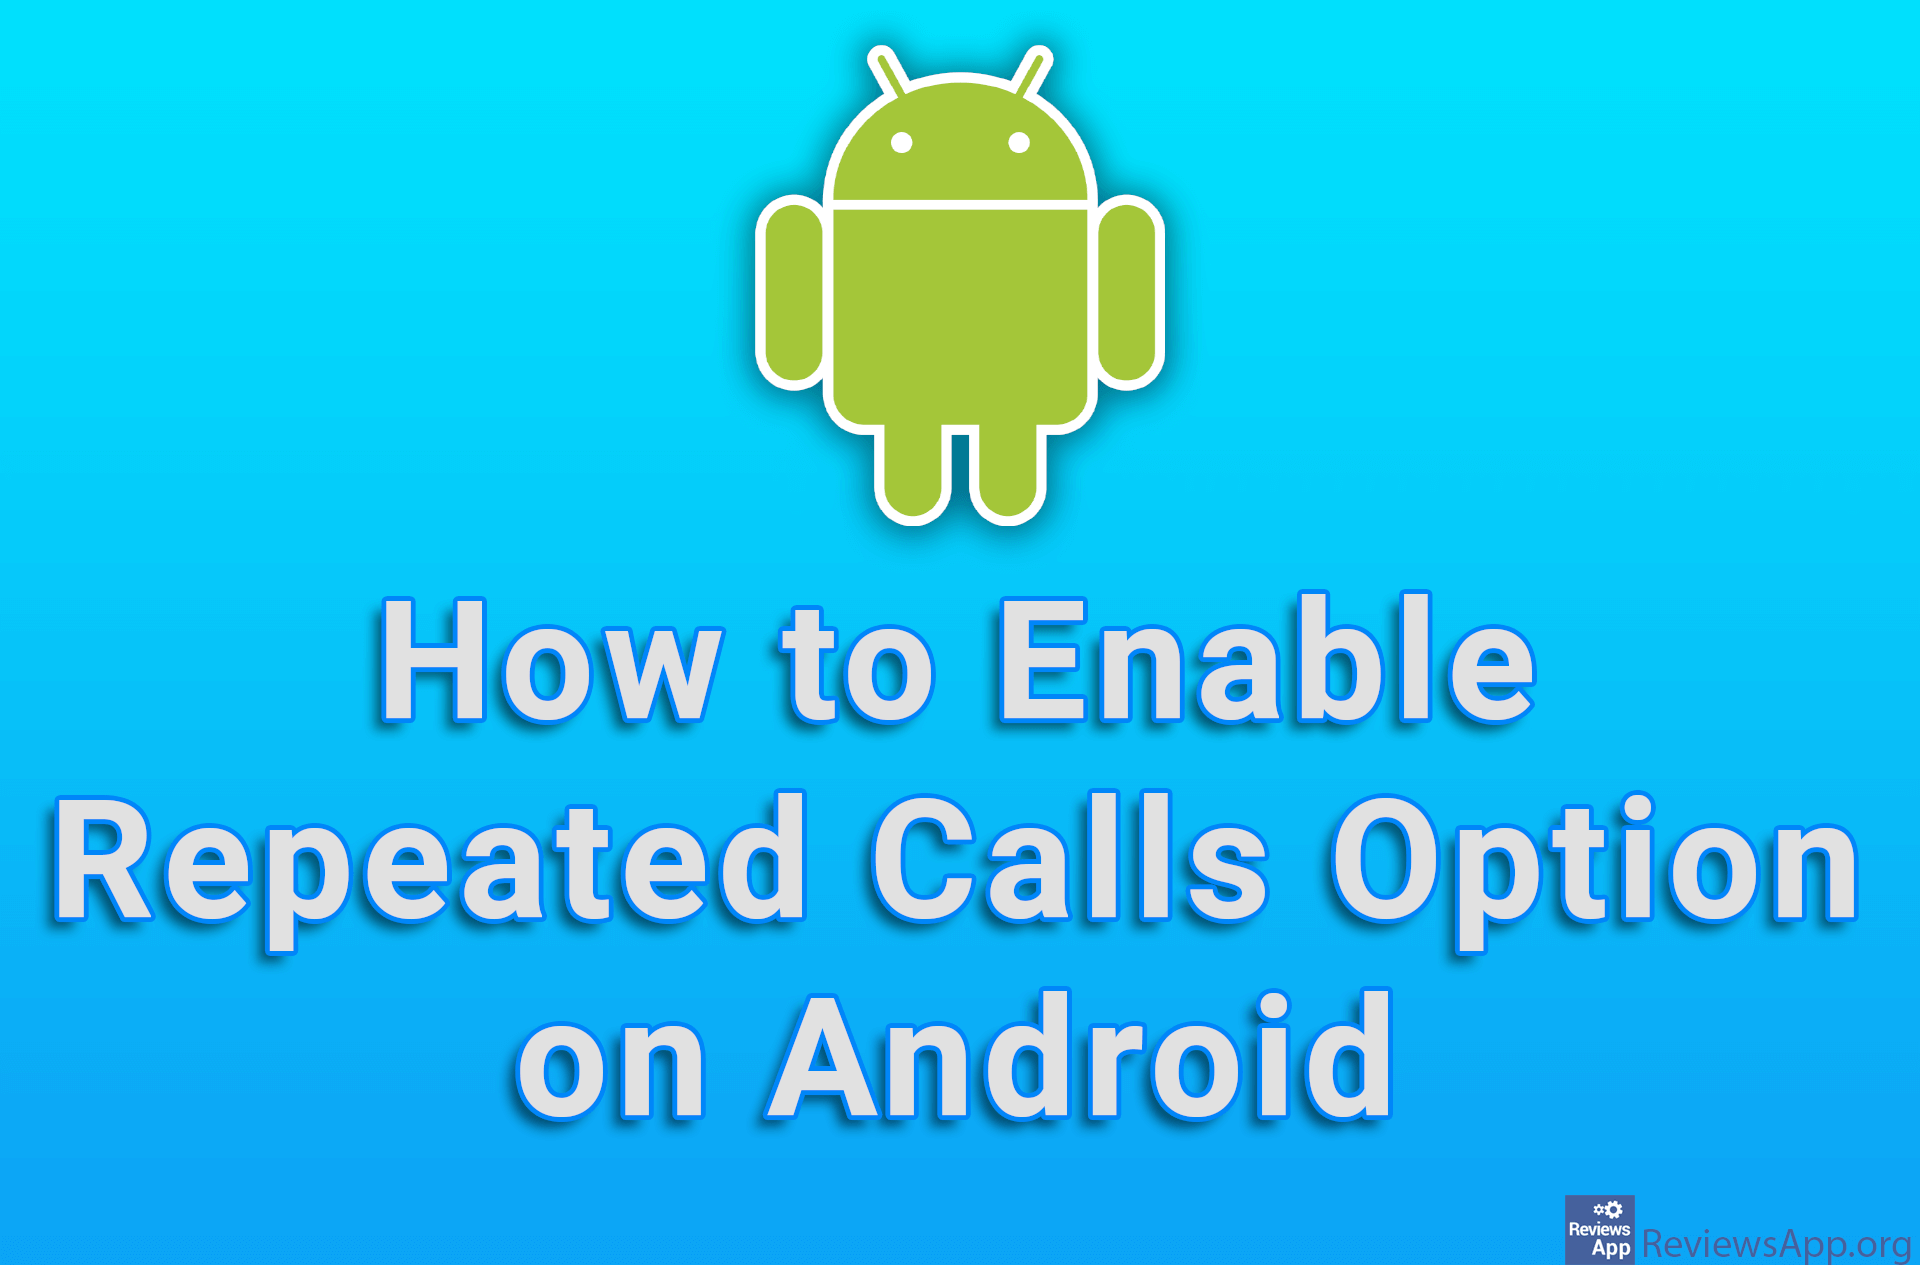 How to Enable the Repeated Calls Option on Android